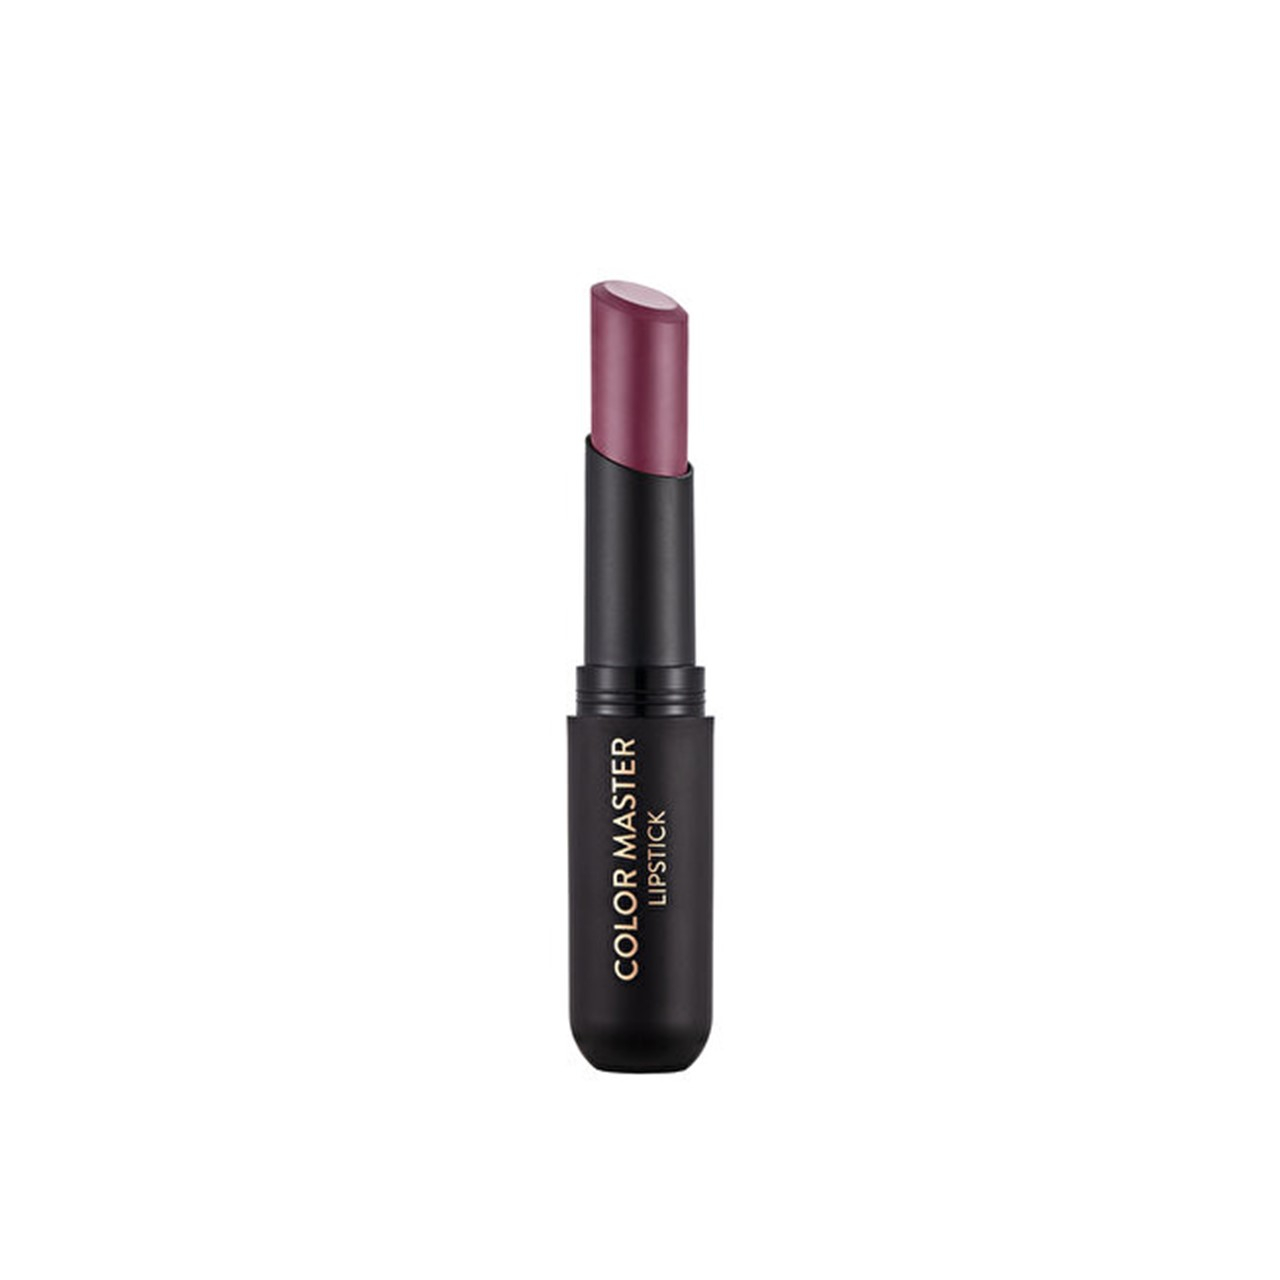 Flormar Color Master Lipstick 10 Rosy Vibes 3g